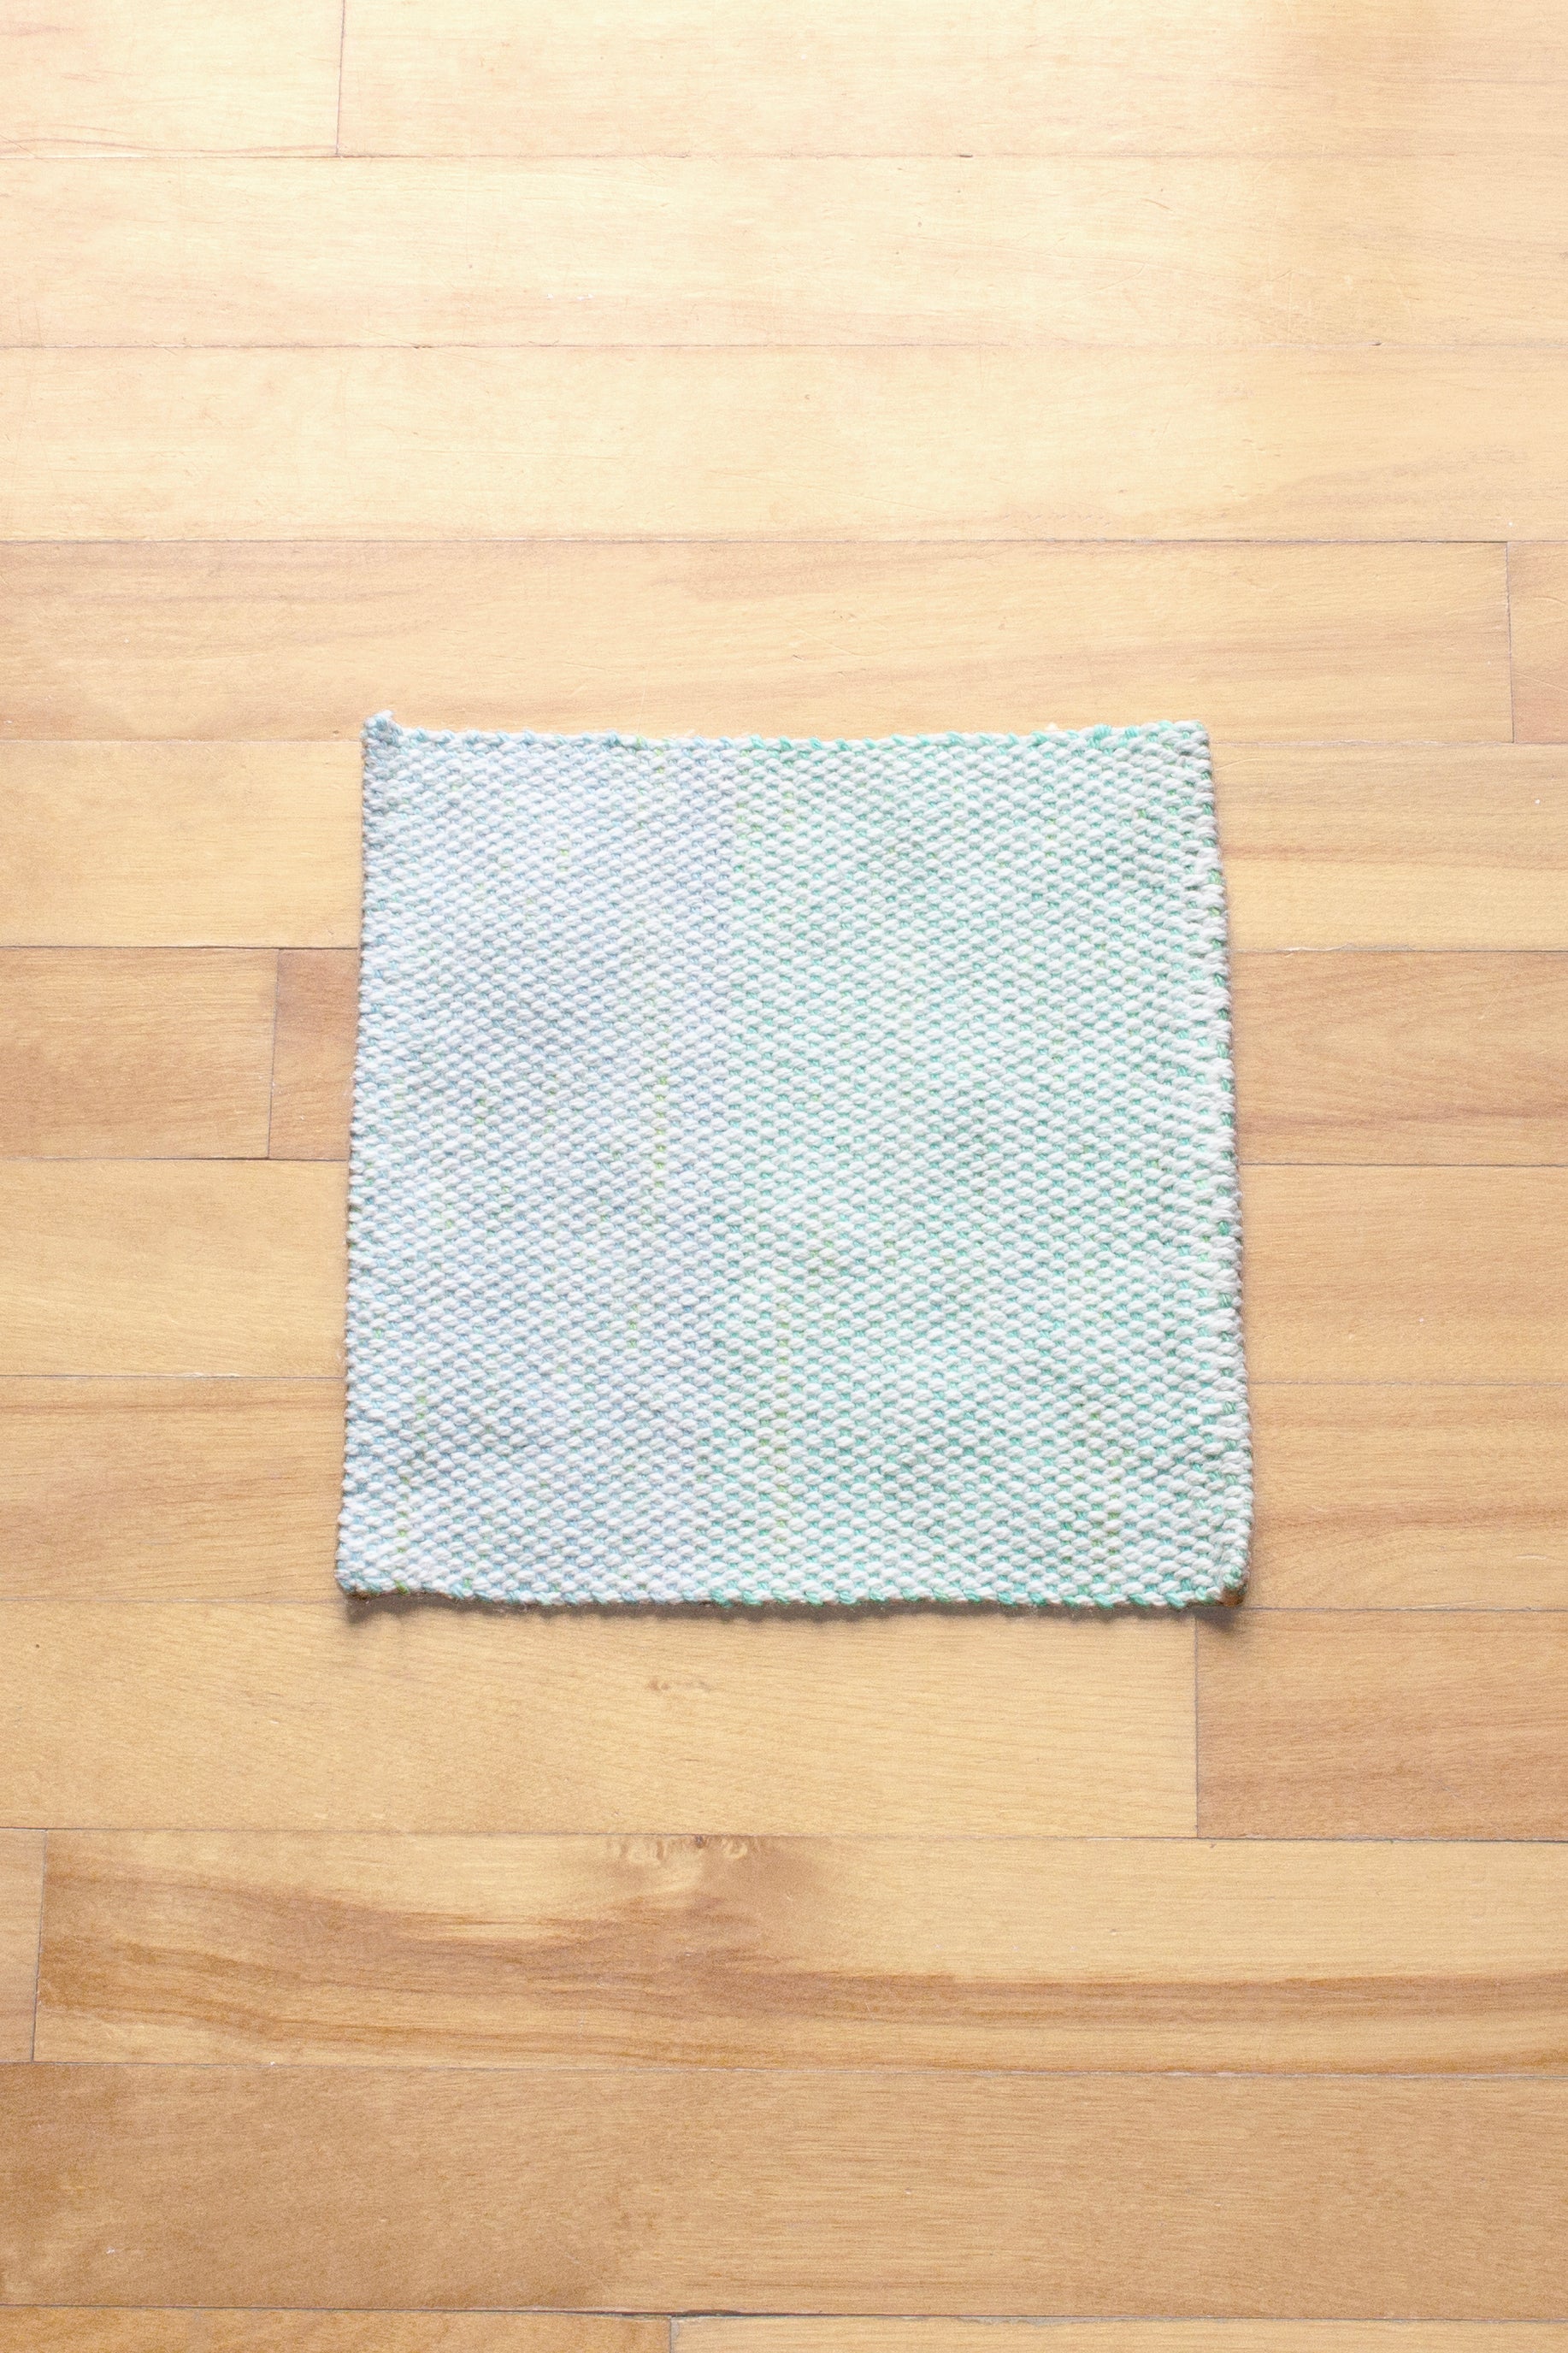 Cotton washcloth, hemmed, Light Blue/Green, handmade, natural fibres, washer and dryer safe, hand sewn hem, woven in Canada